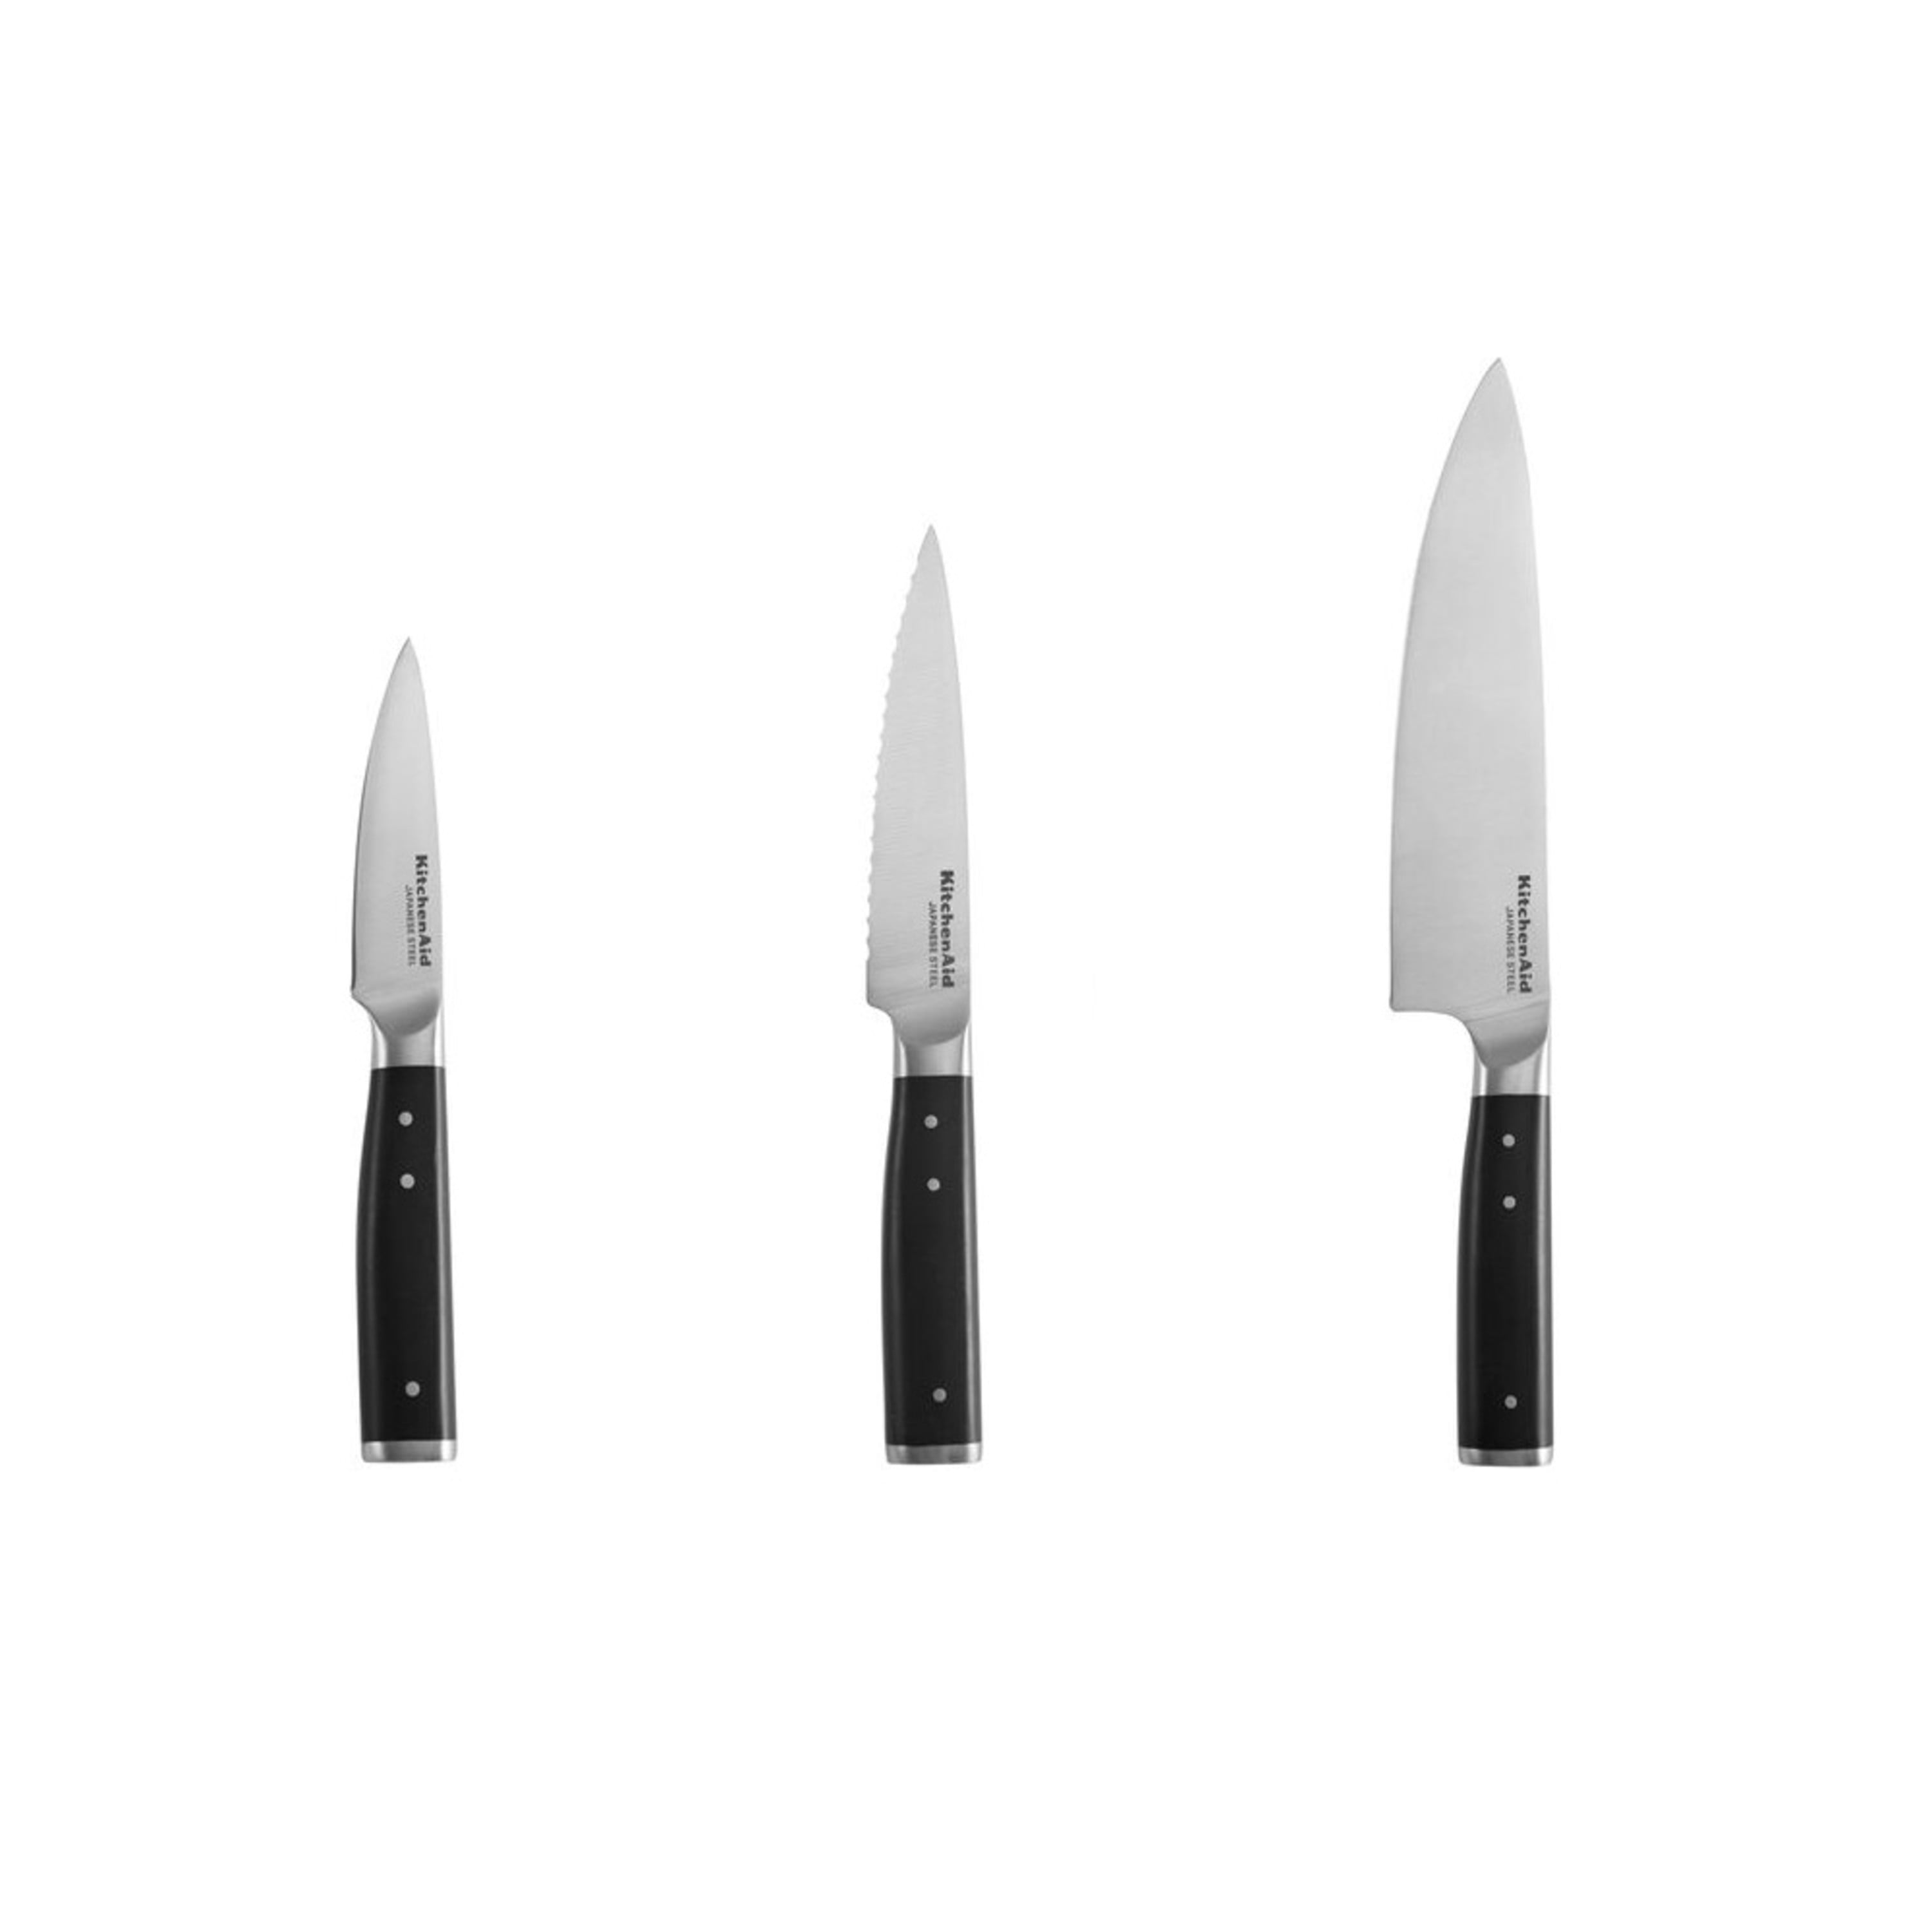 Kitchenaid Gourmet 3-piece Forged Tripe-Riveted Chef Knife Set with Blade Covers, Black